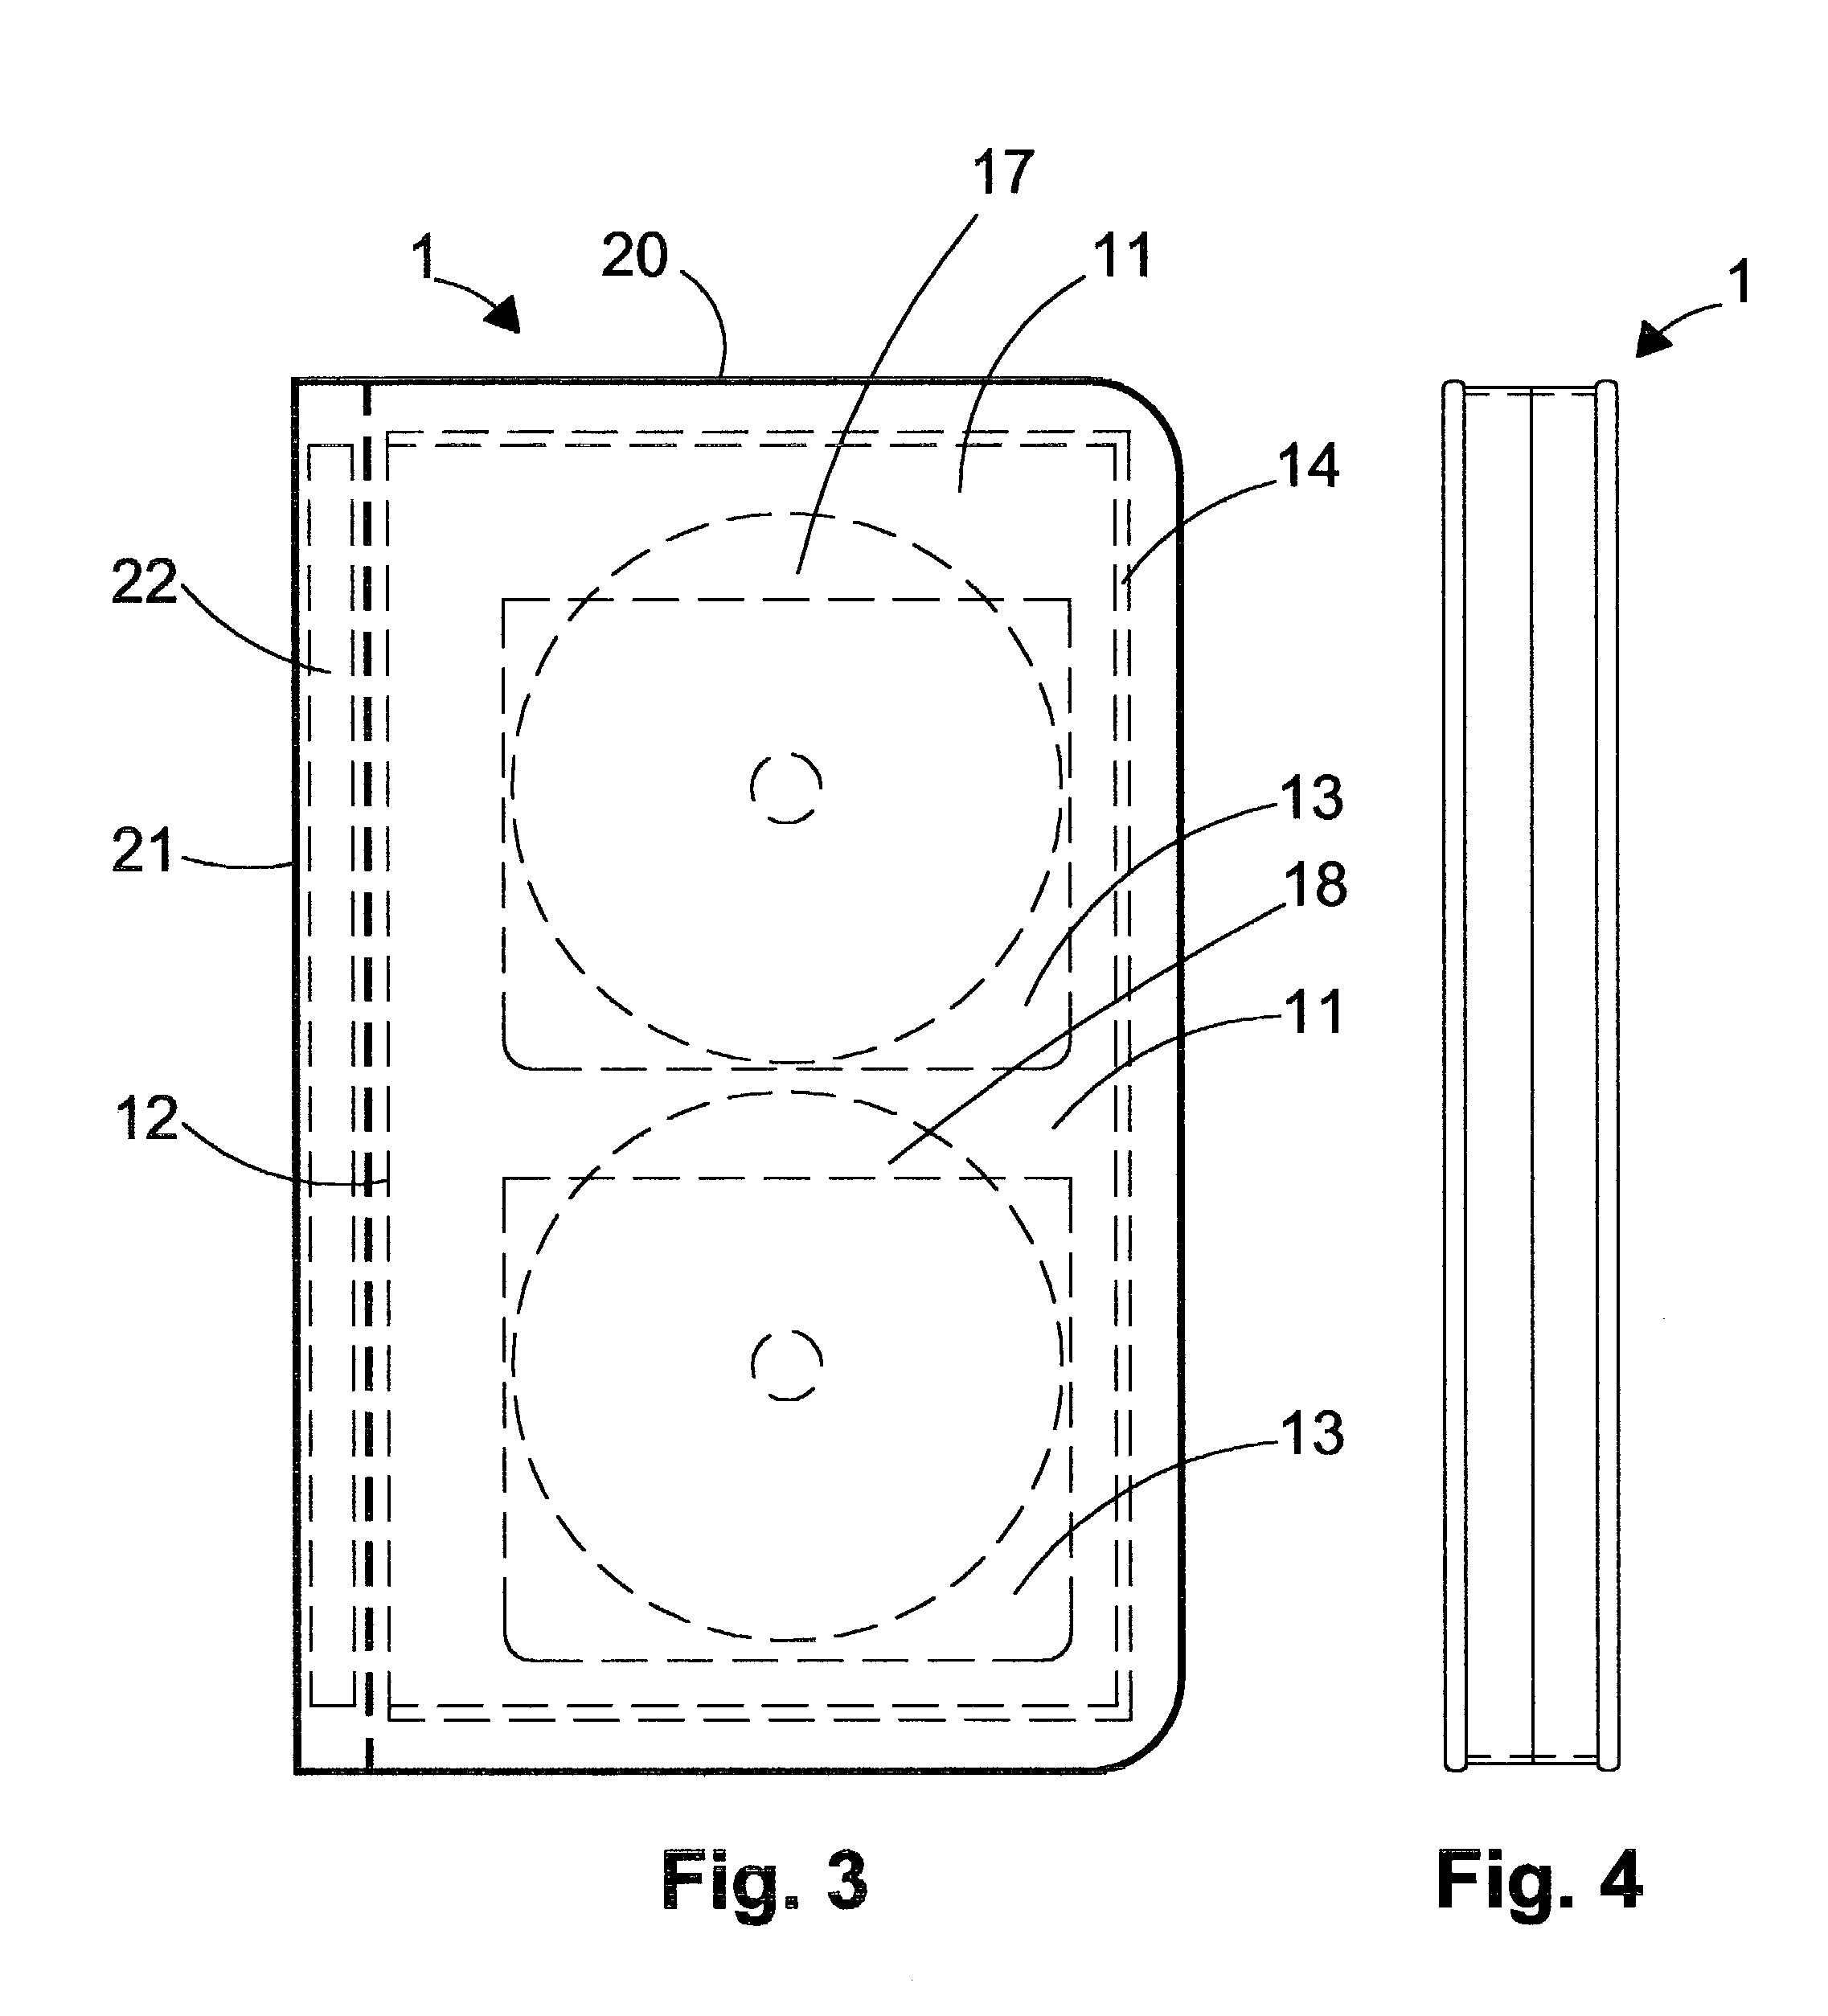 Self-illuminated storage and carrying case